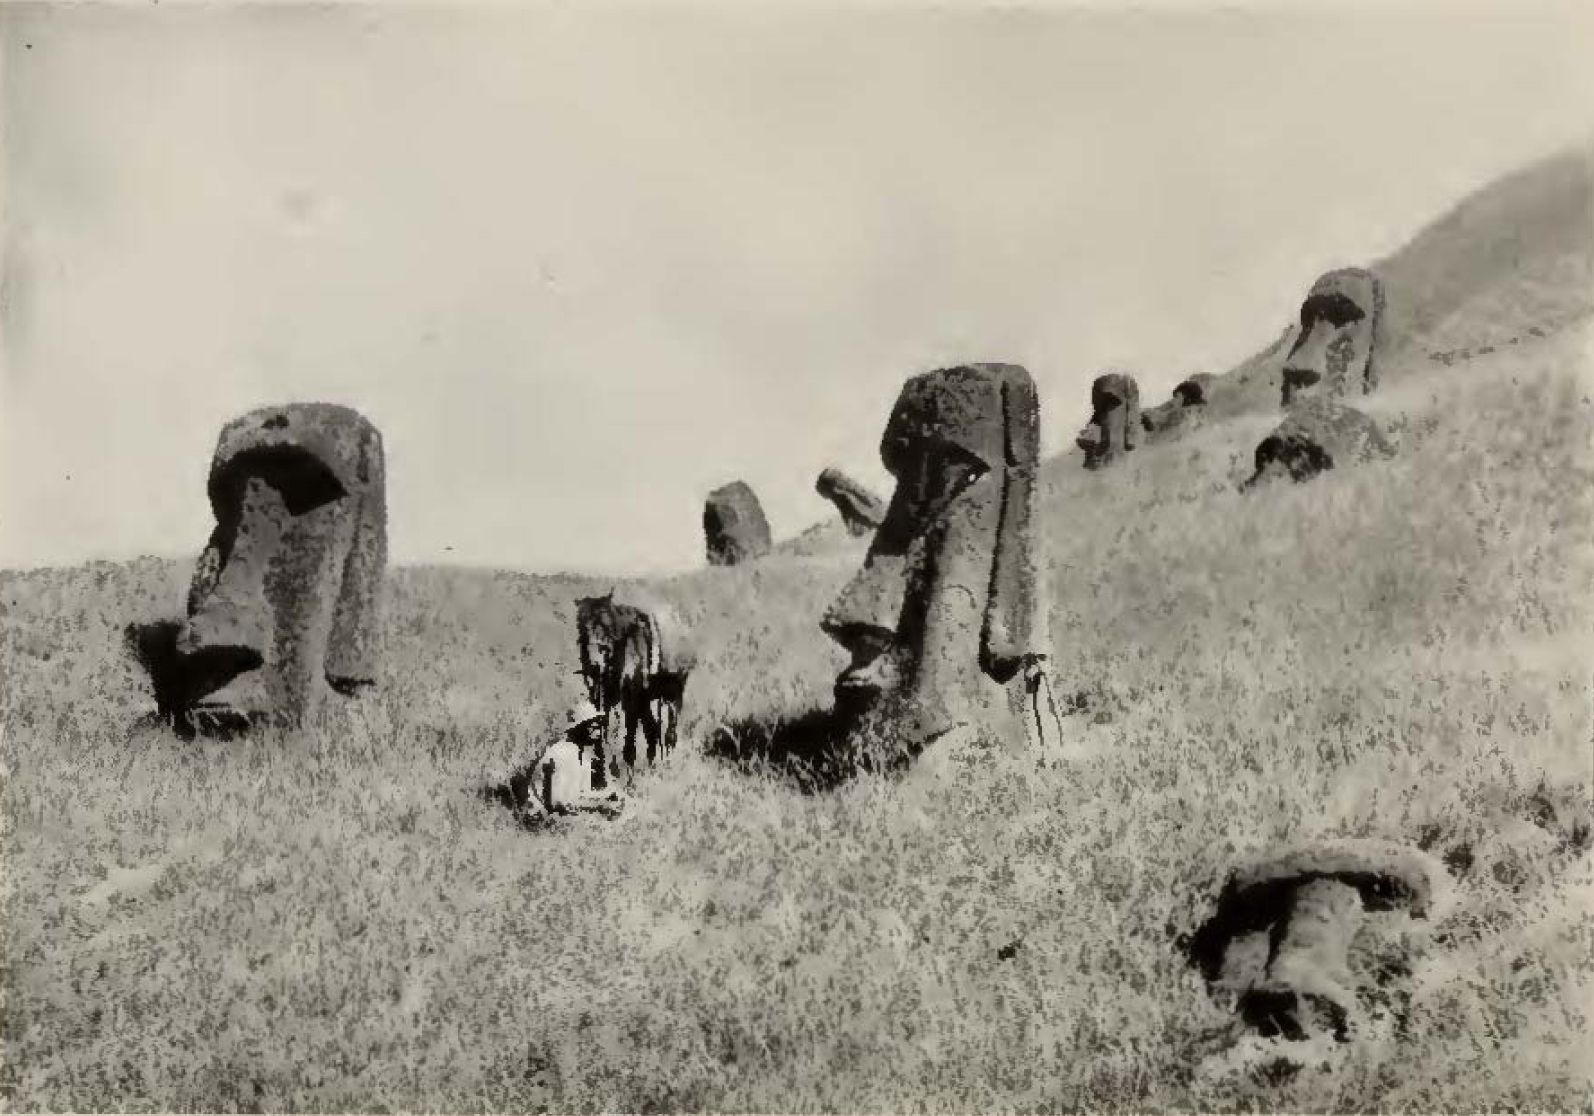 head-shaped stone statues standing in a field